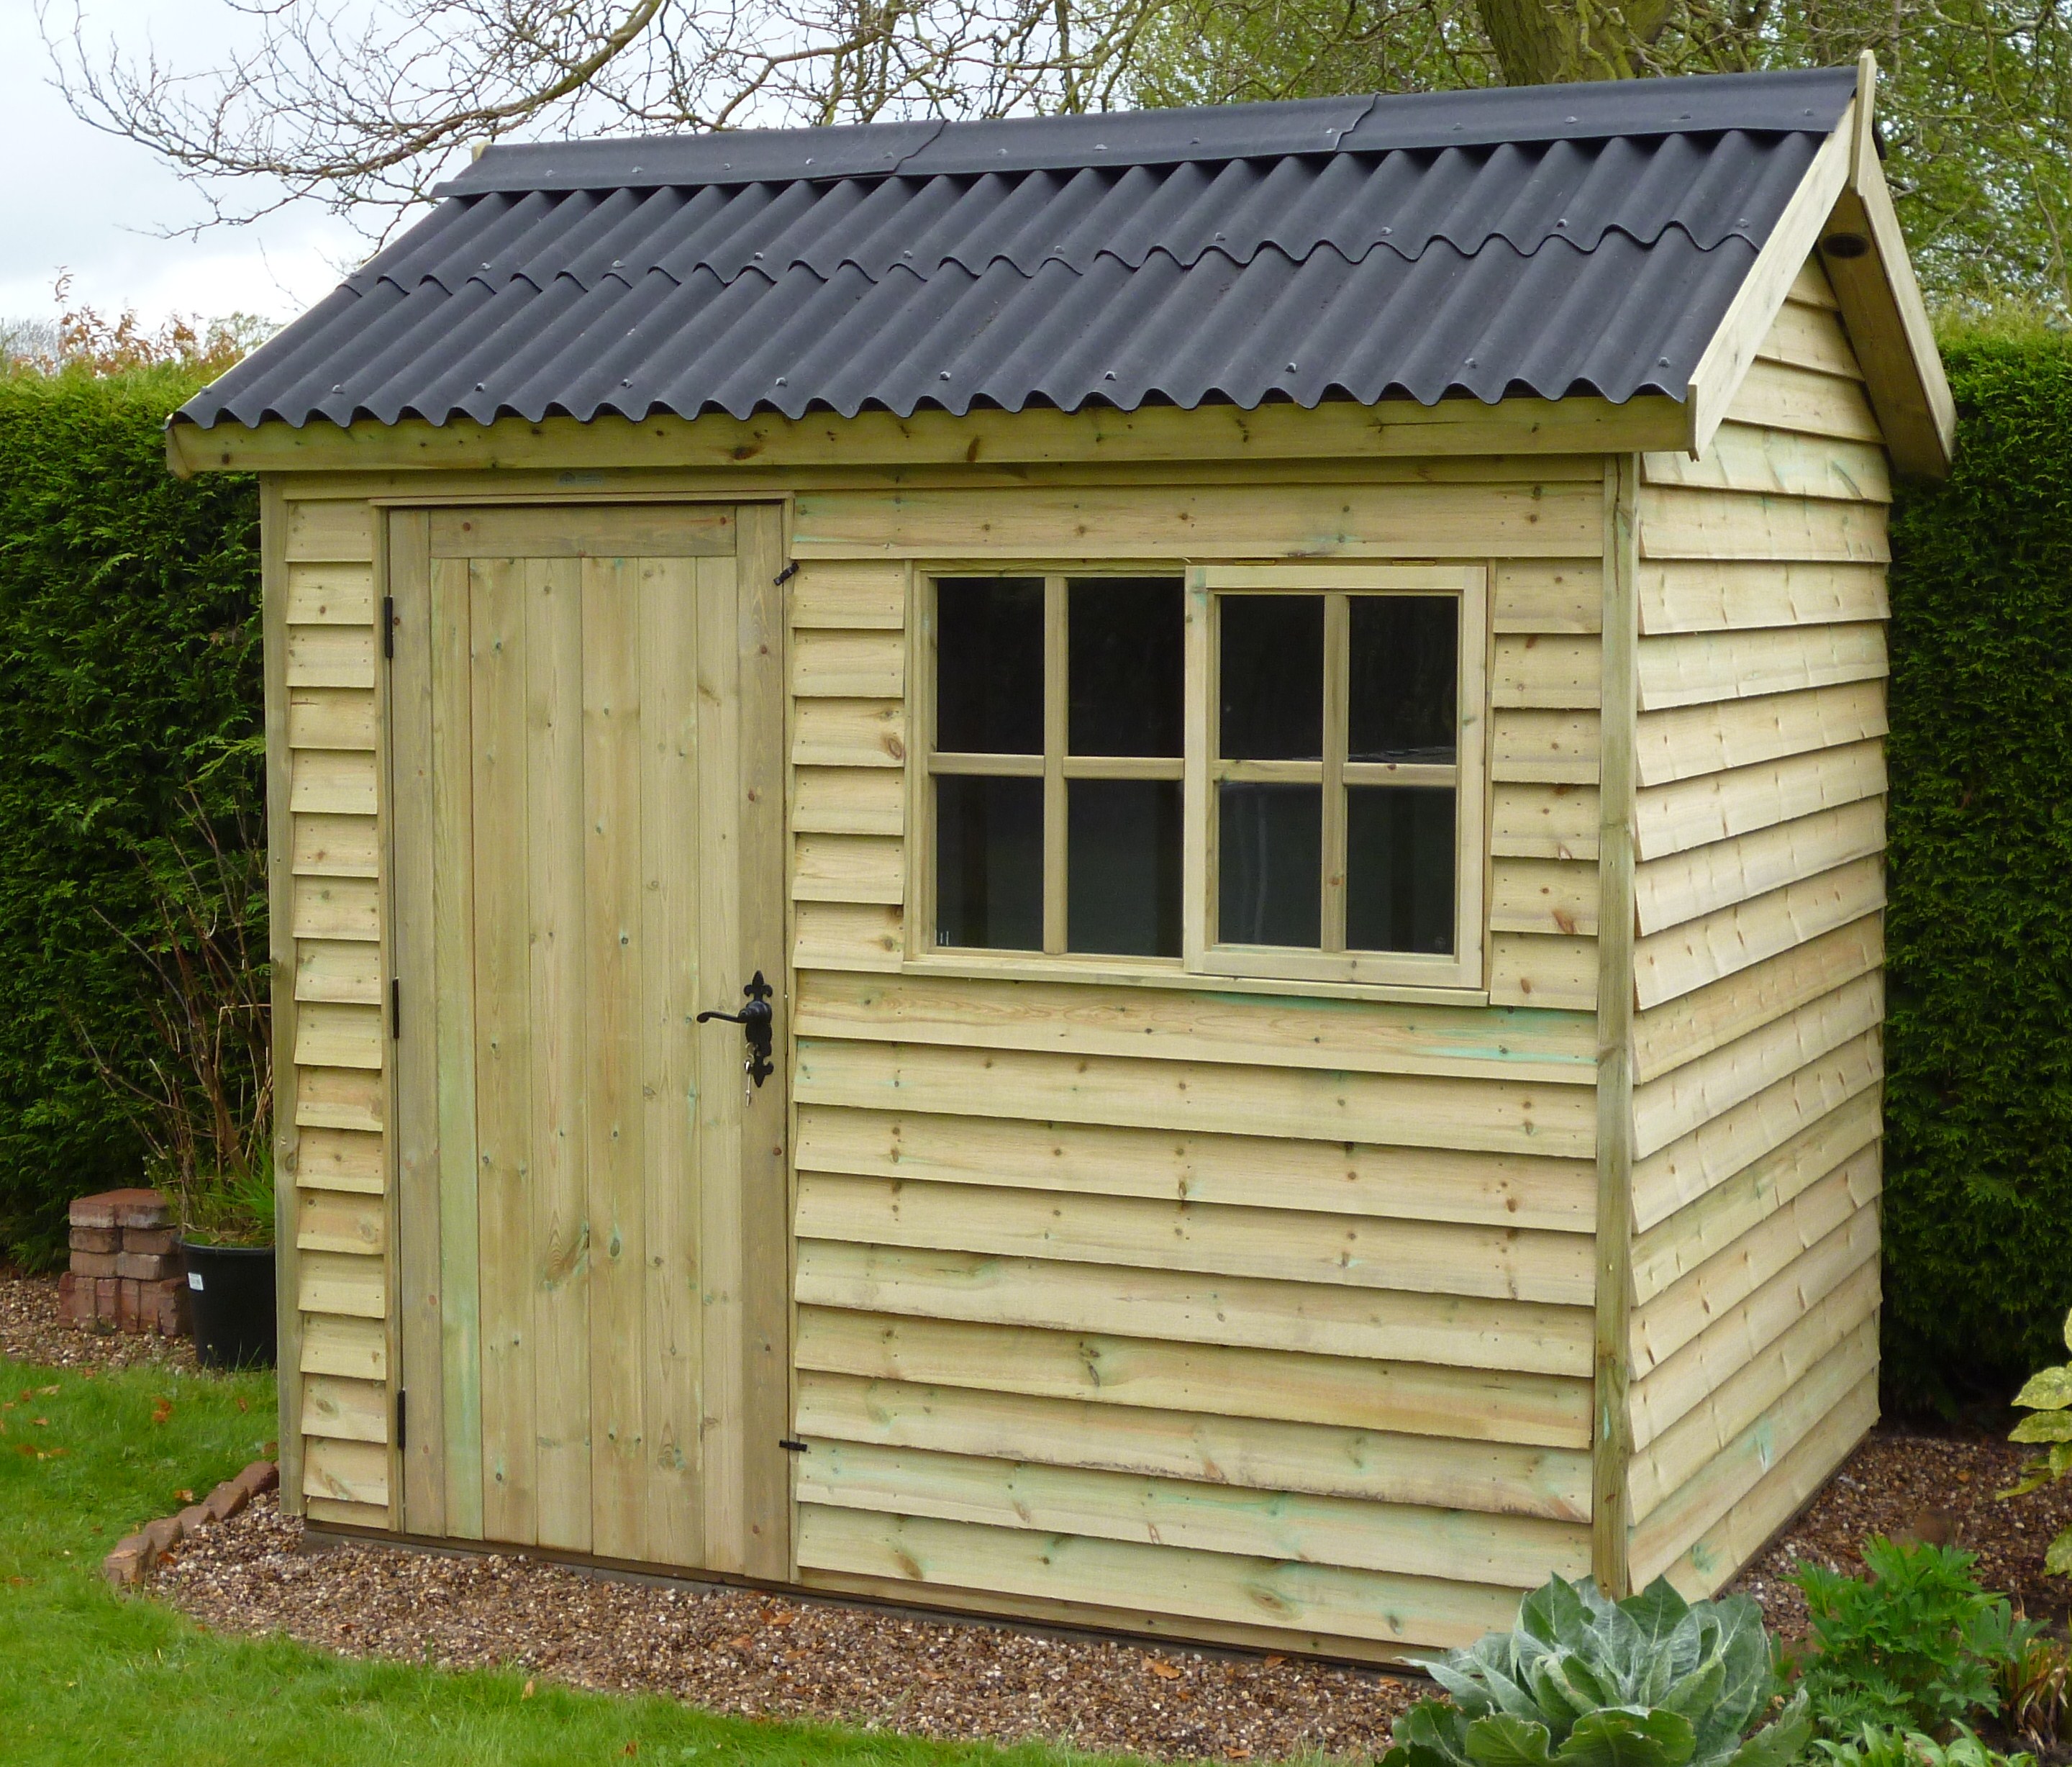 garden sheds add a whimsical touch to a back yard